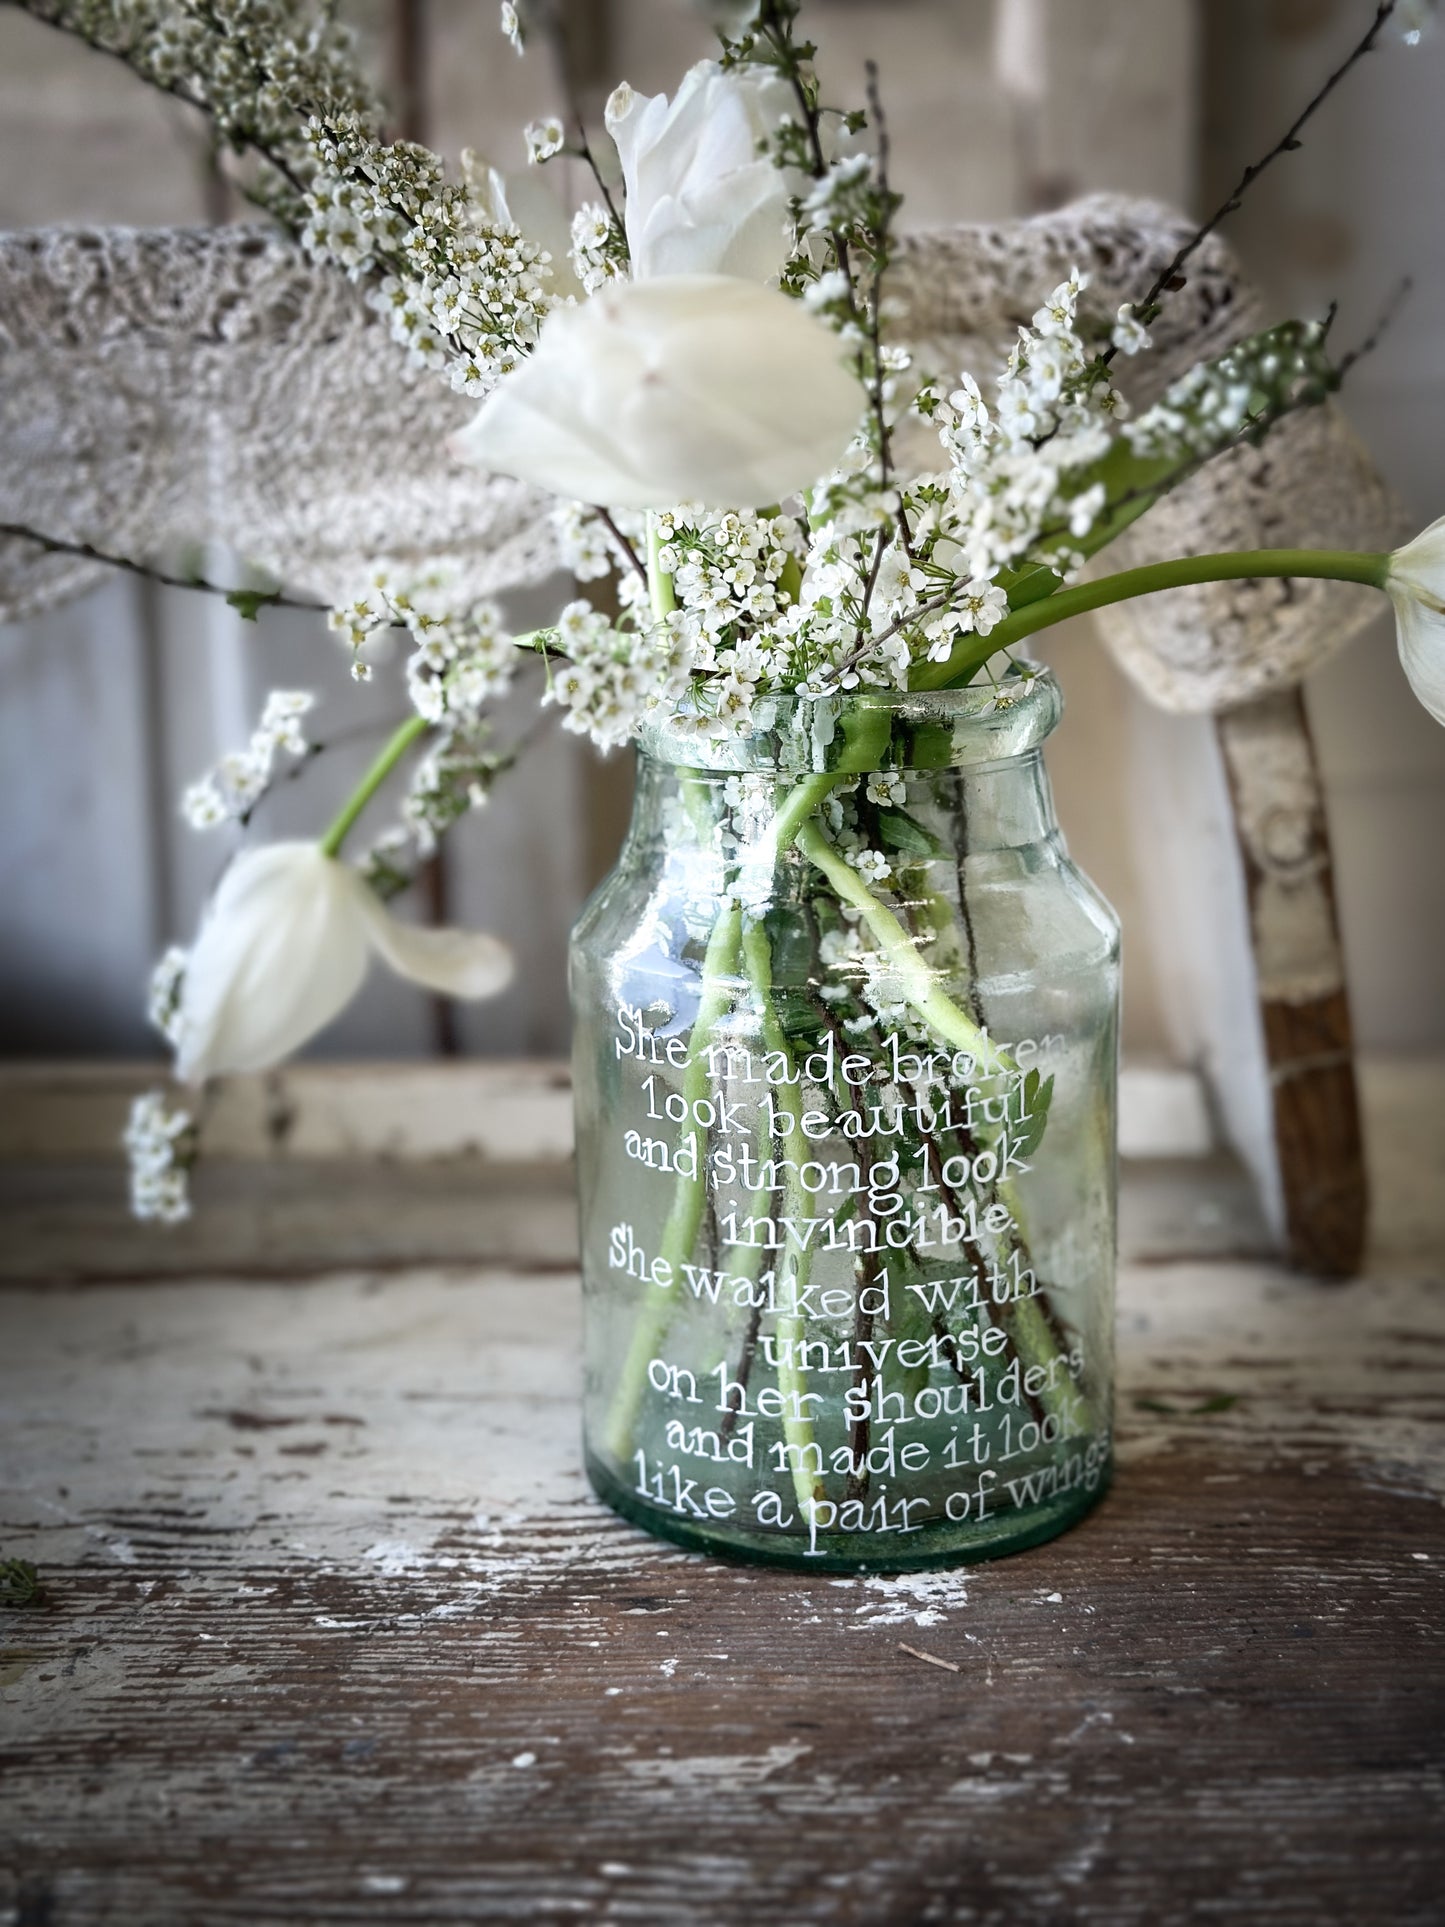 A beautiful large Victorian preserve jar painted with a quote